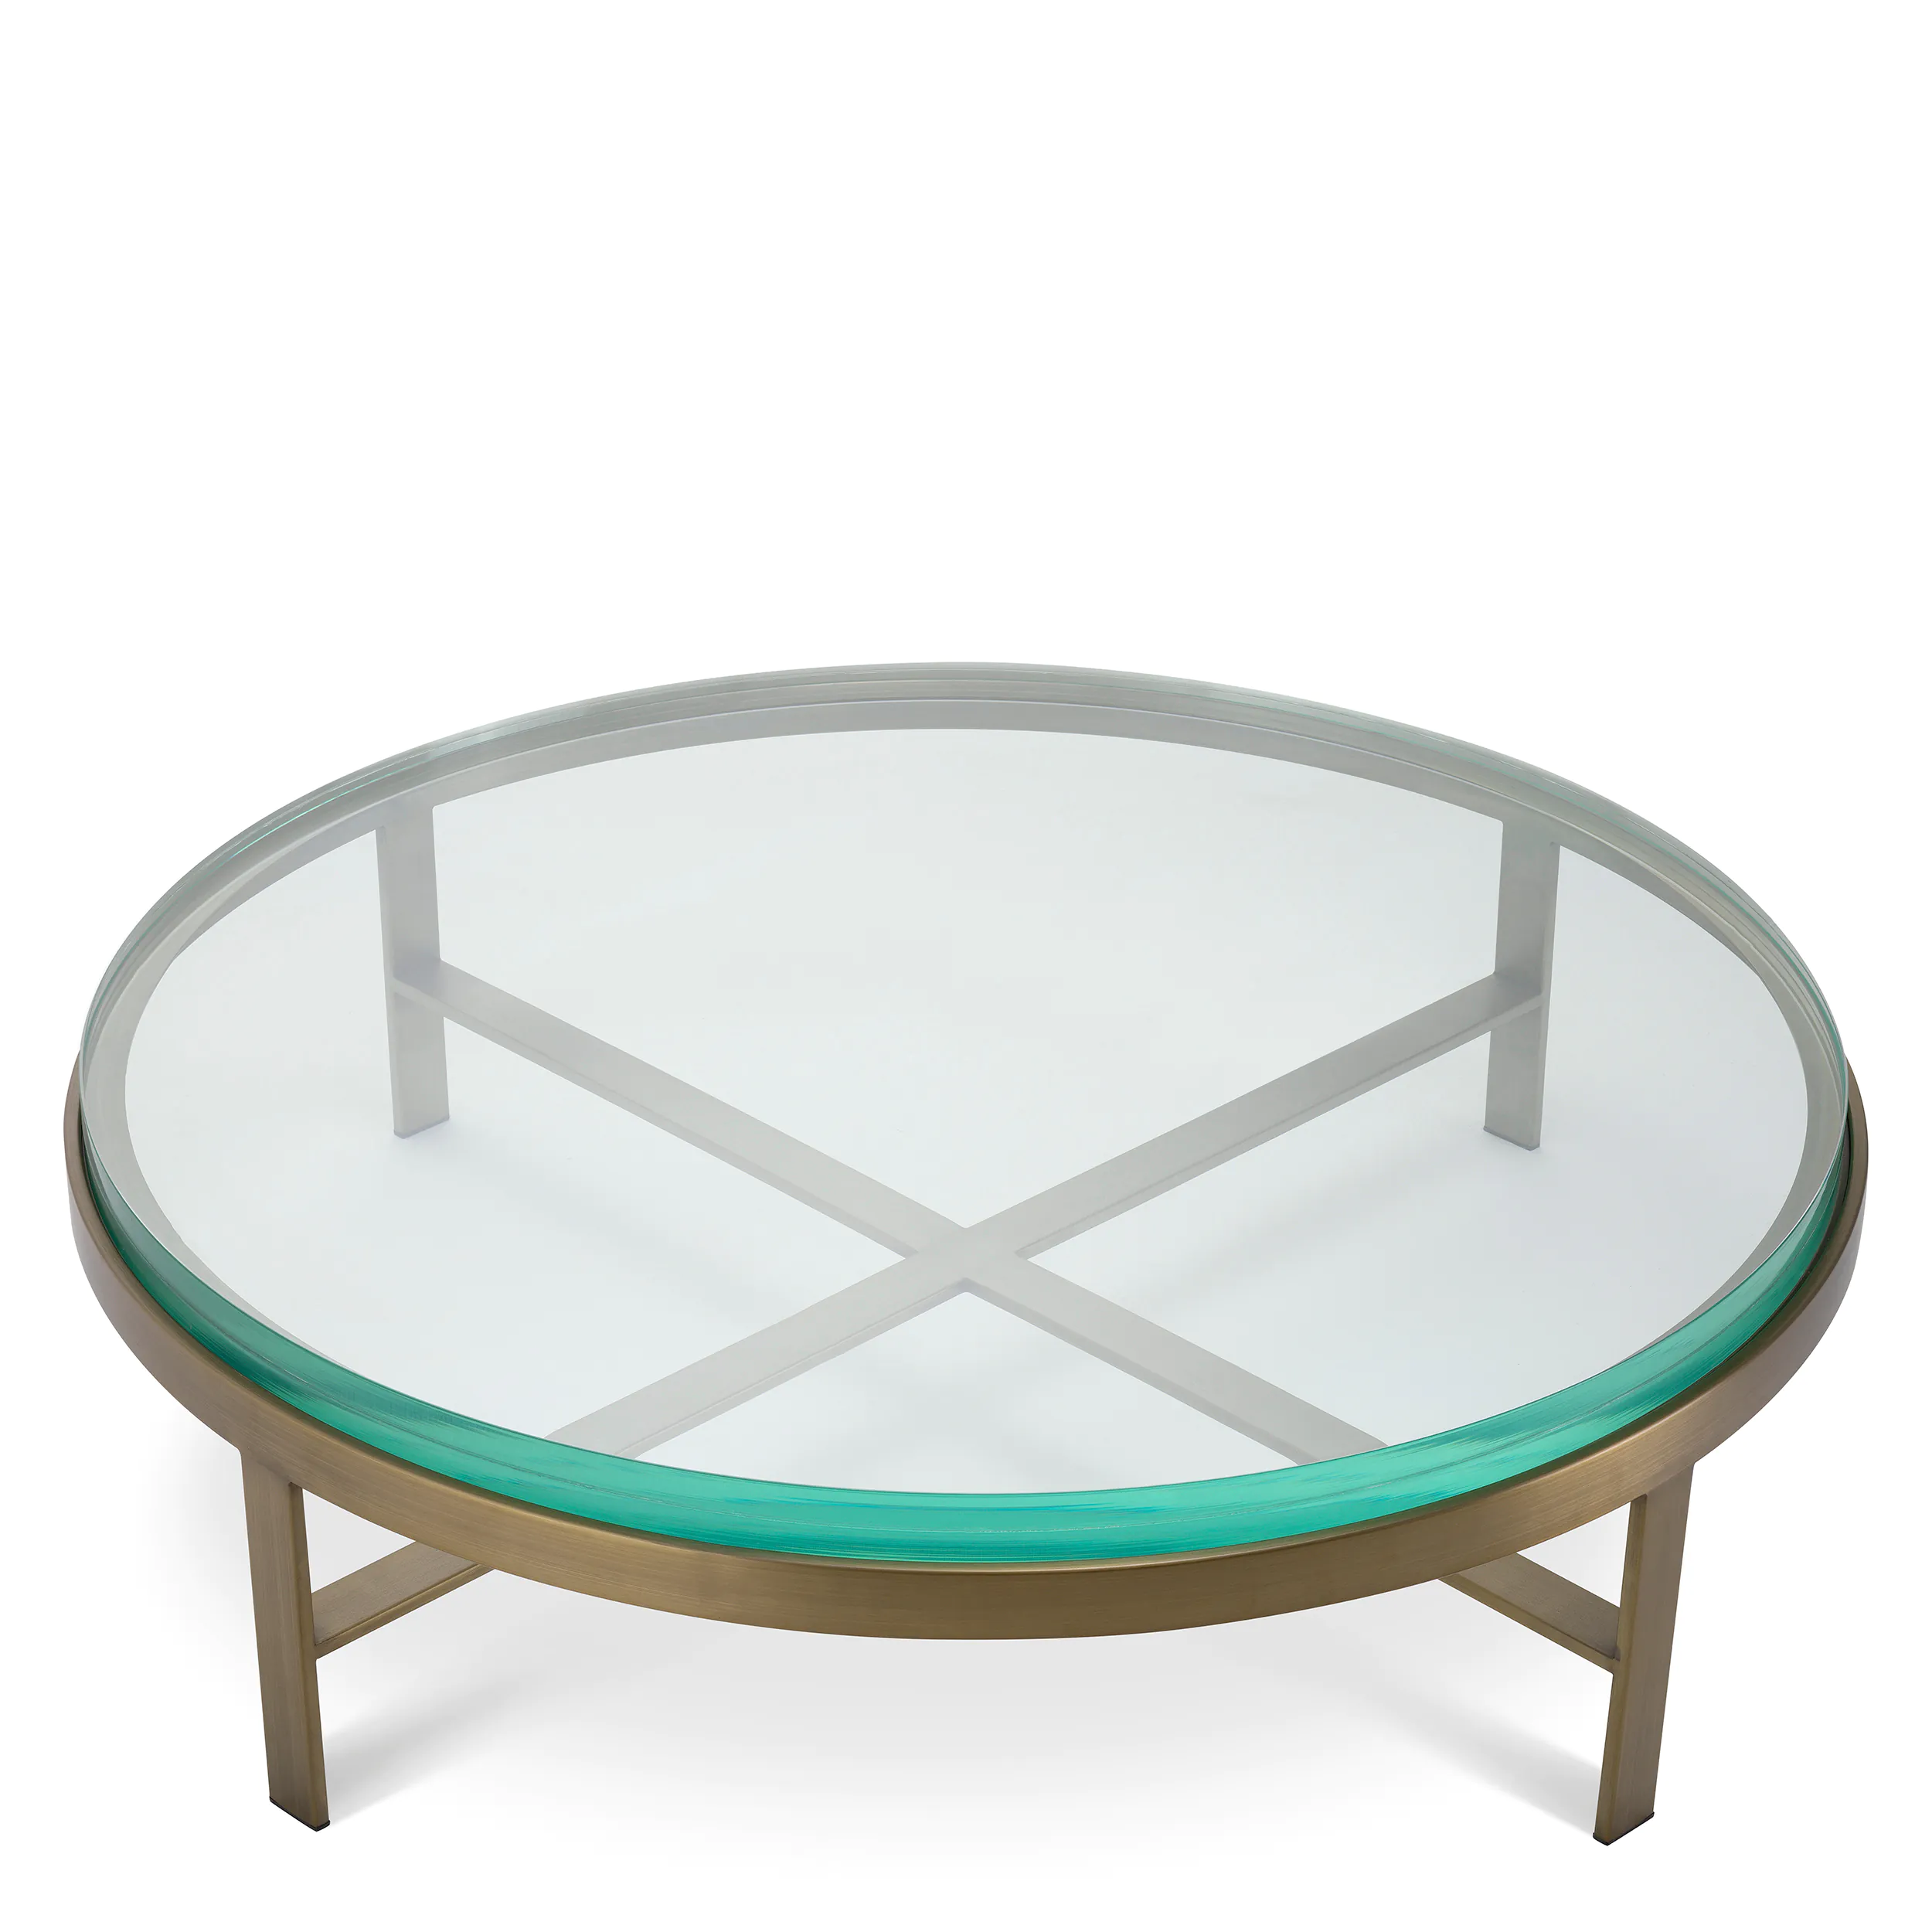 Hoxton Coffee Table Brushed Brass Eichholtz-116512-21id